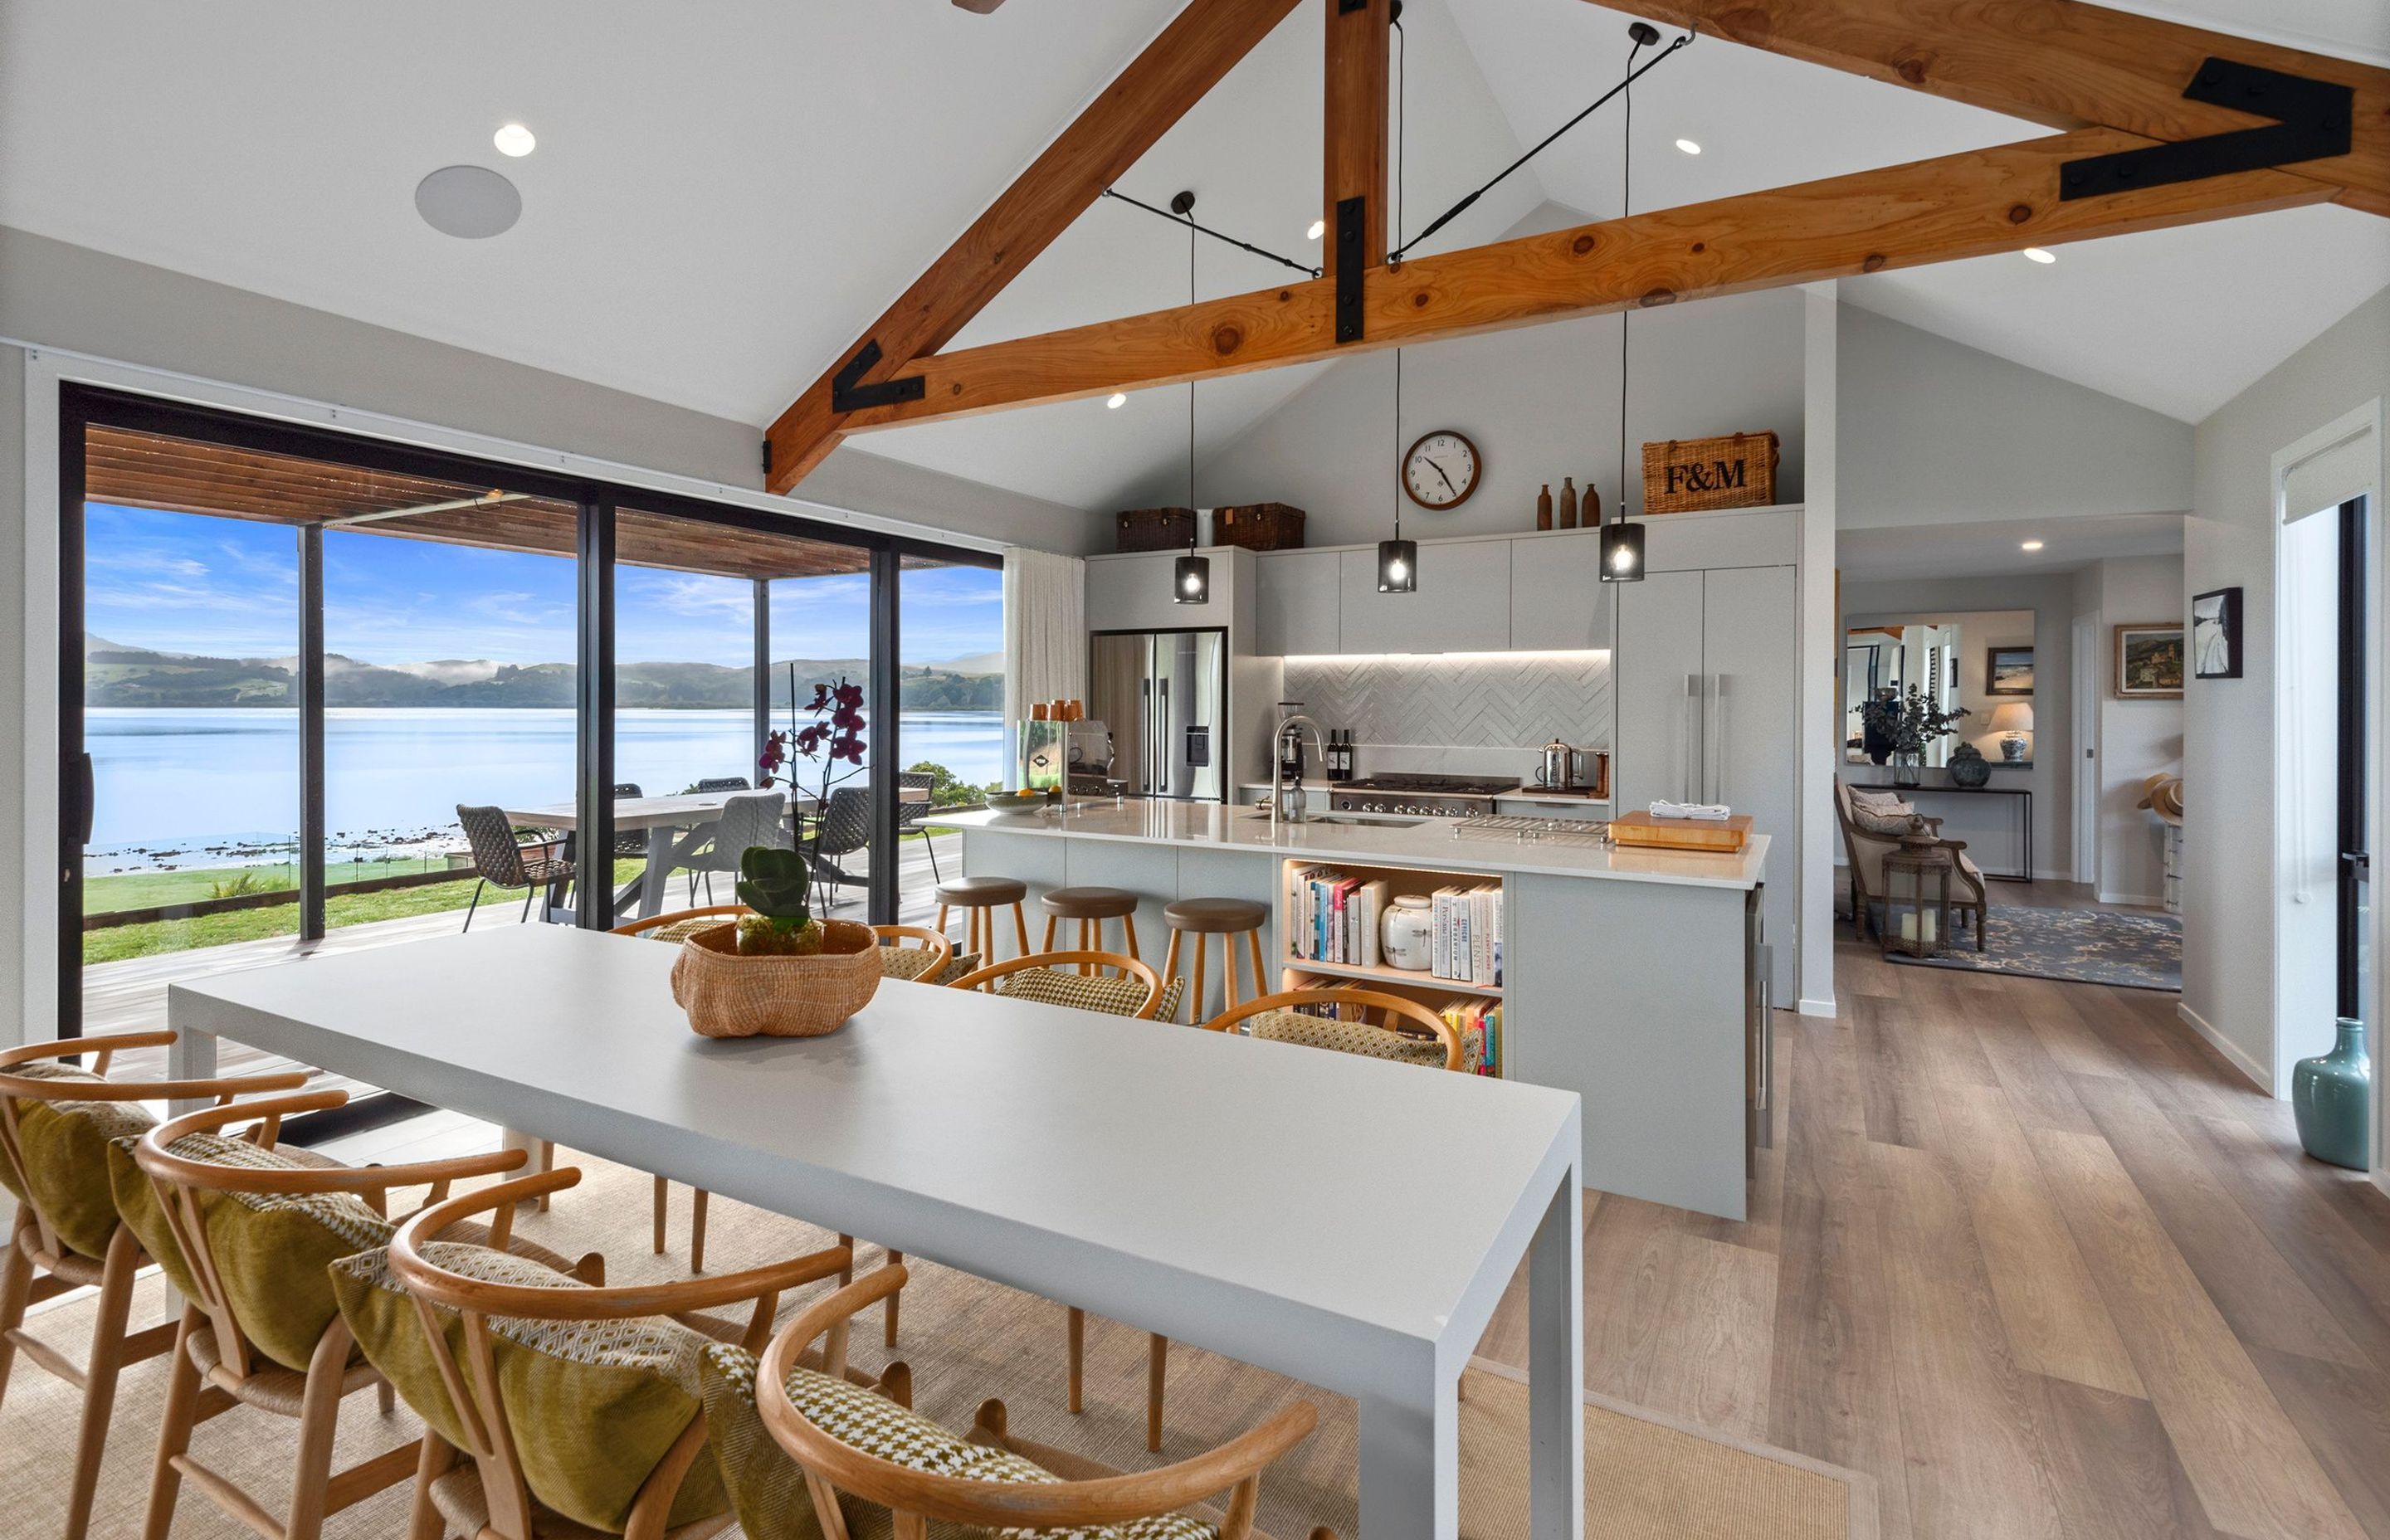 The open-plan kitchen and dining area is ideal for hosting.